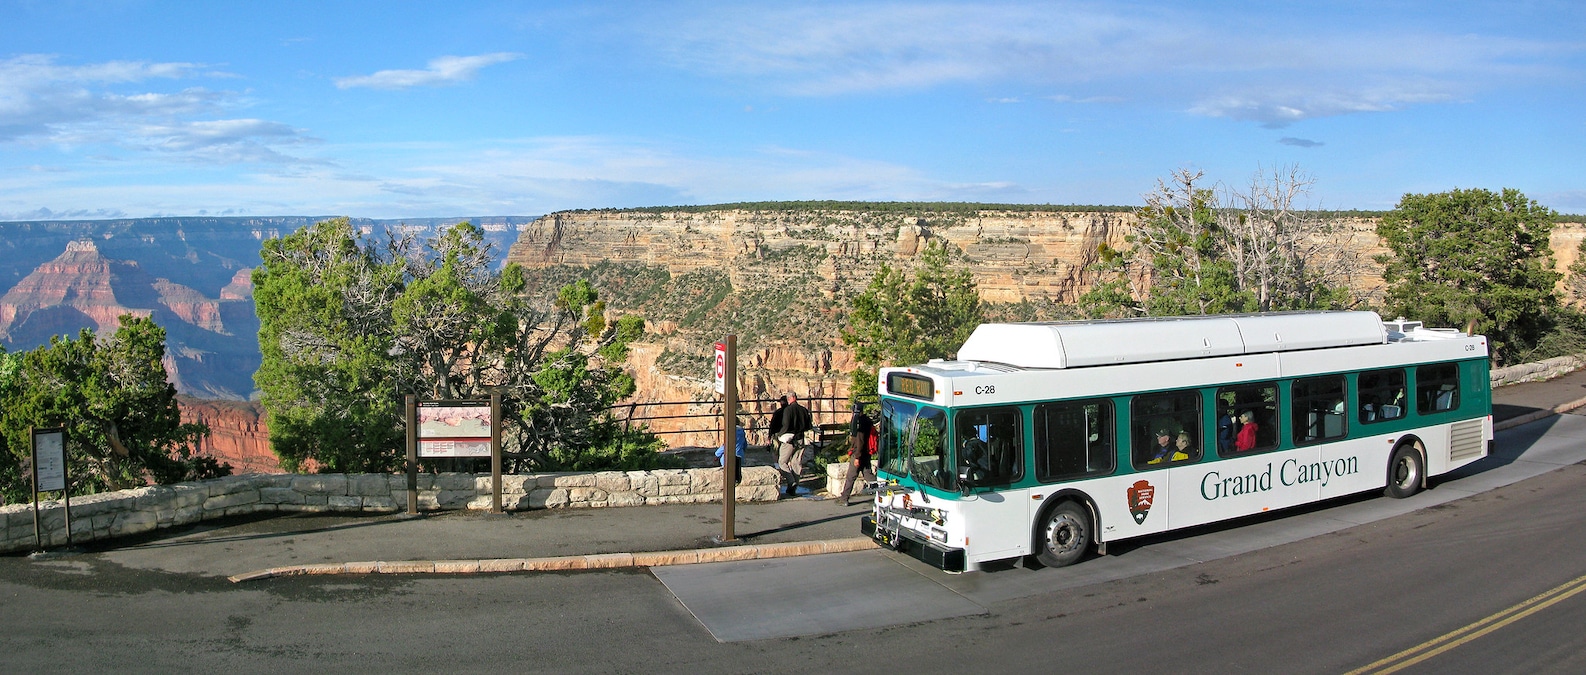 Grand Canyon National Park's shuttle bus stop at Monument Creek Vista